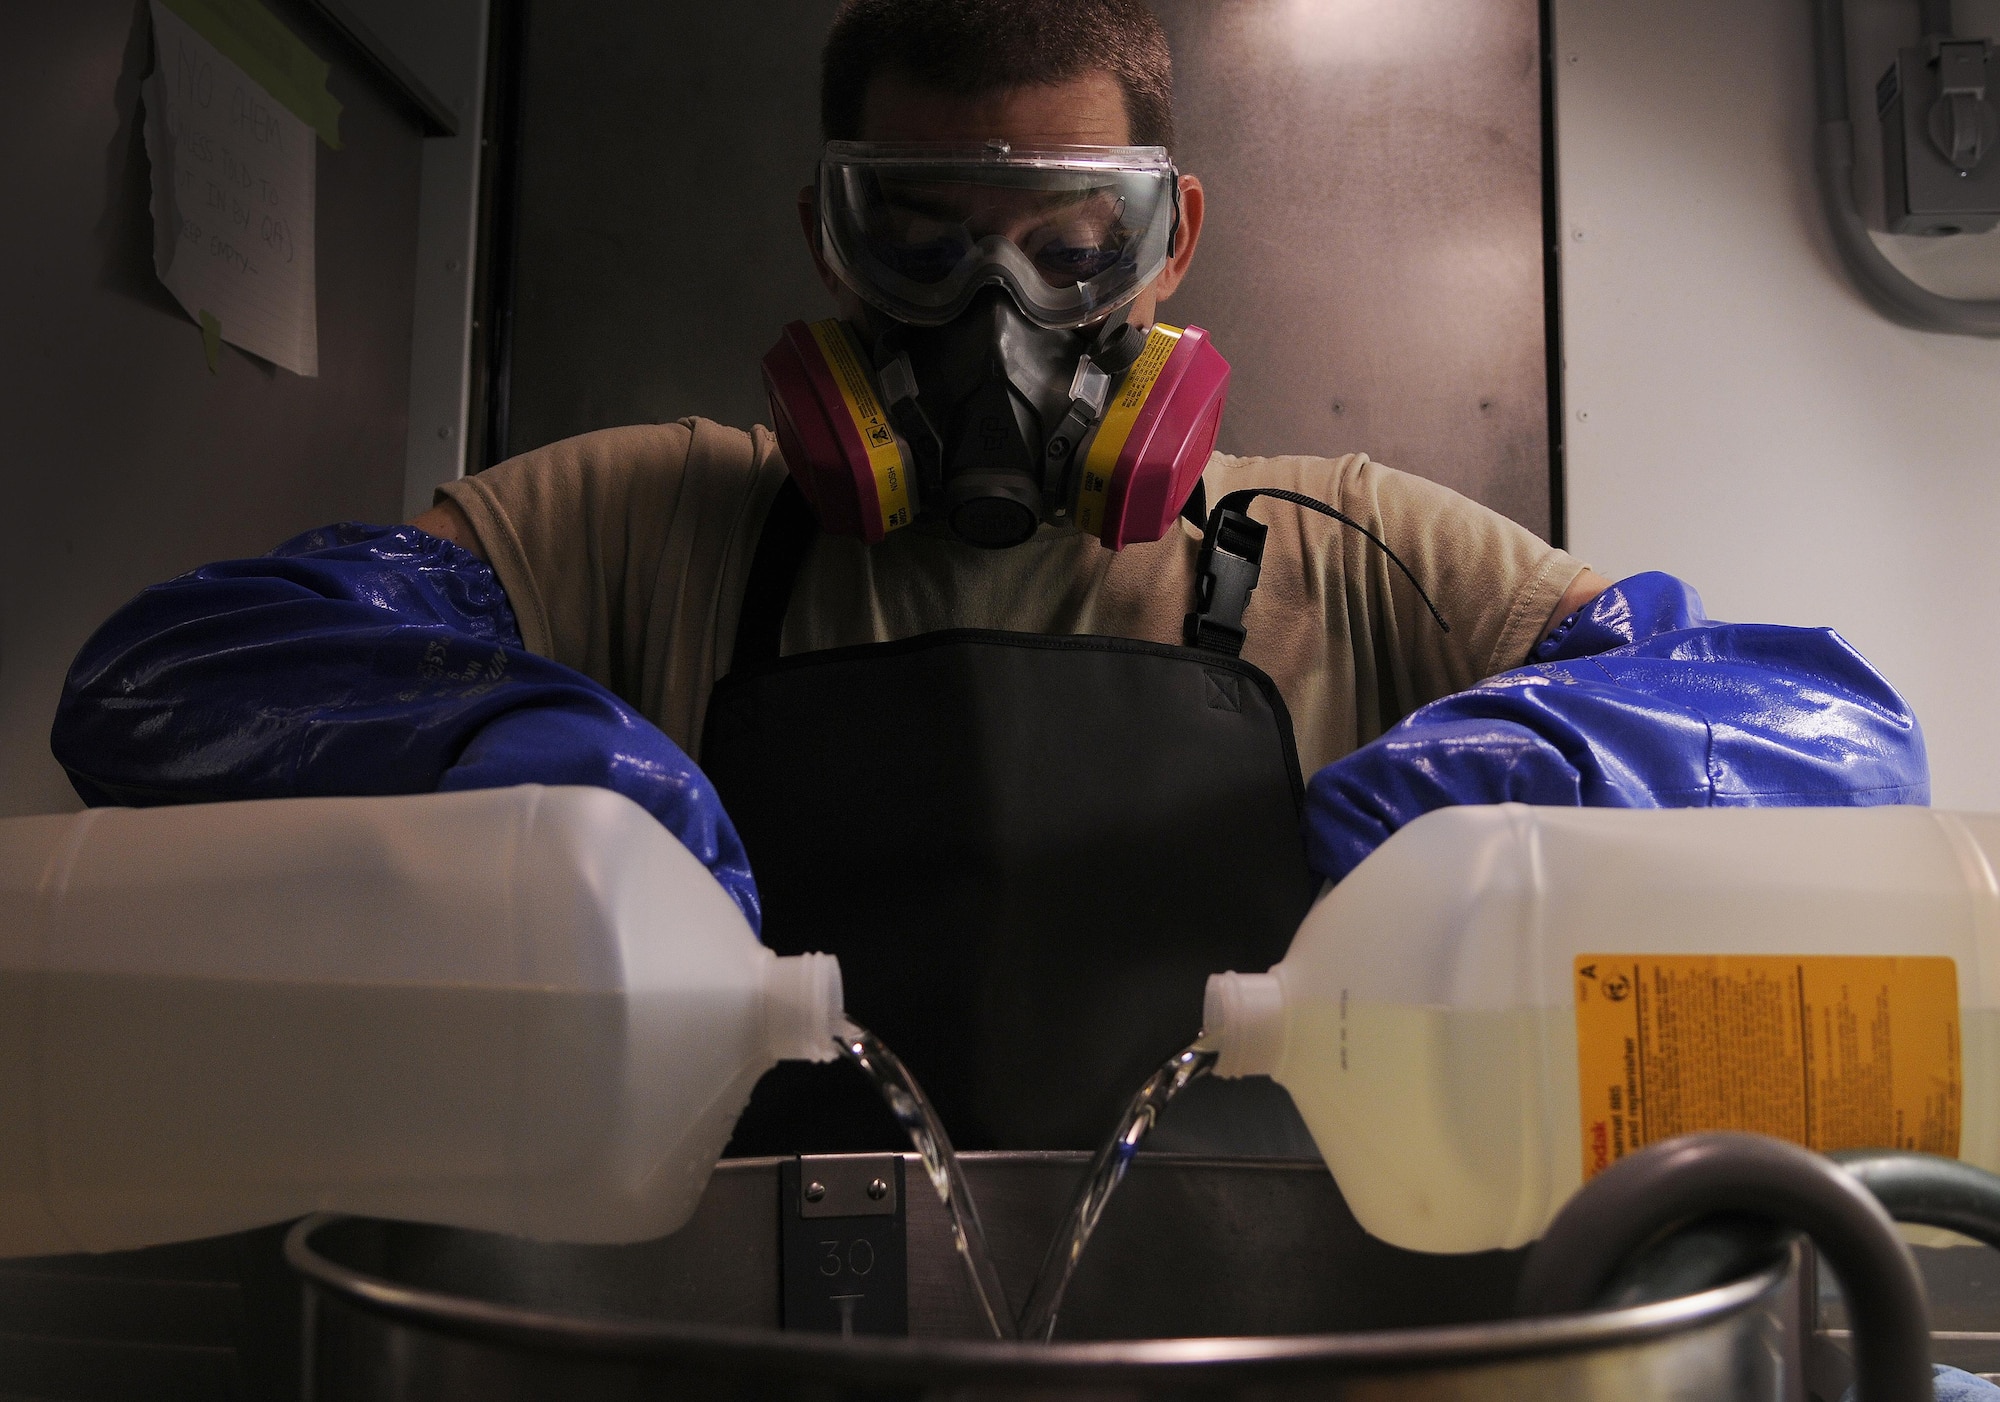 Staff Sgt. Christopher Hatch, 9IS aerial film processing section lead, pours fixer solution into a mixer Sept. 14, 2016, at Beale Air Force Base, California. Using the fixer and various other chemicals, film processors develop the wet-film imagery captured by the Optical Bar Camera. (Air Force photo by Airman 1st Class Taylor A. Workman)